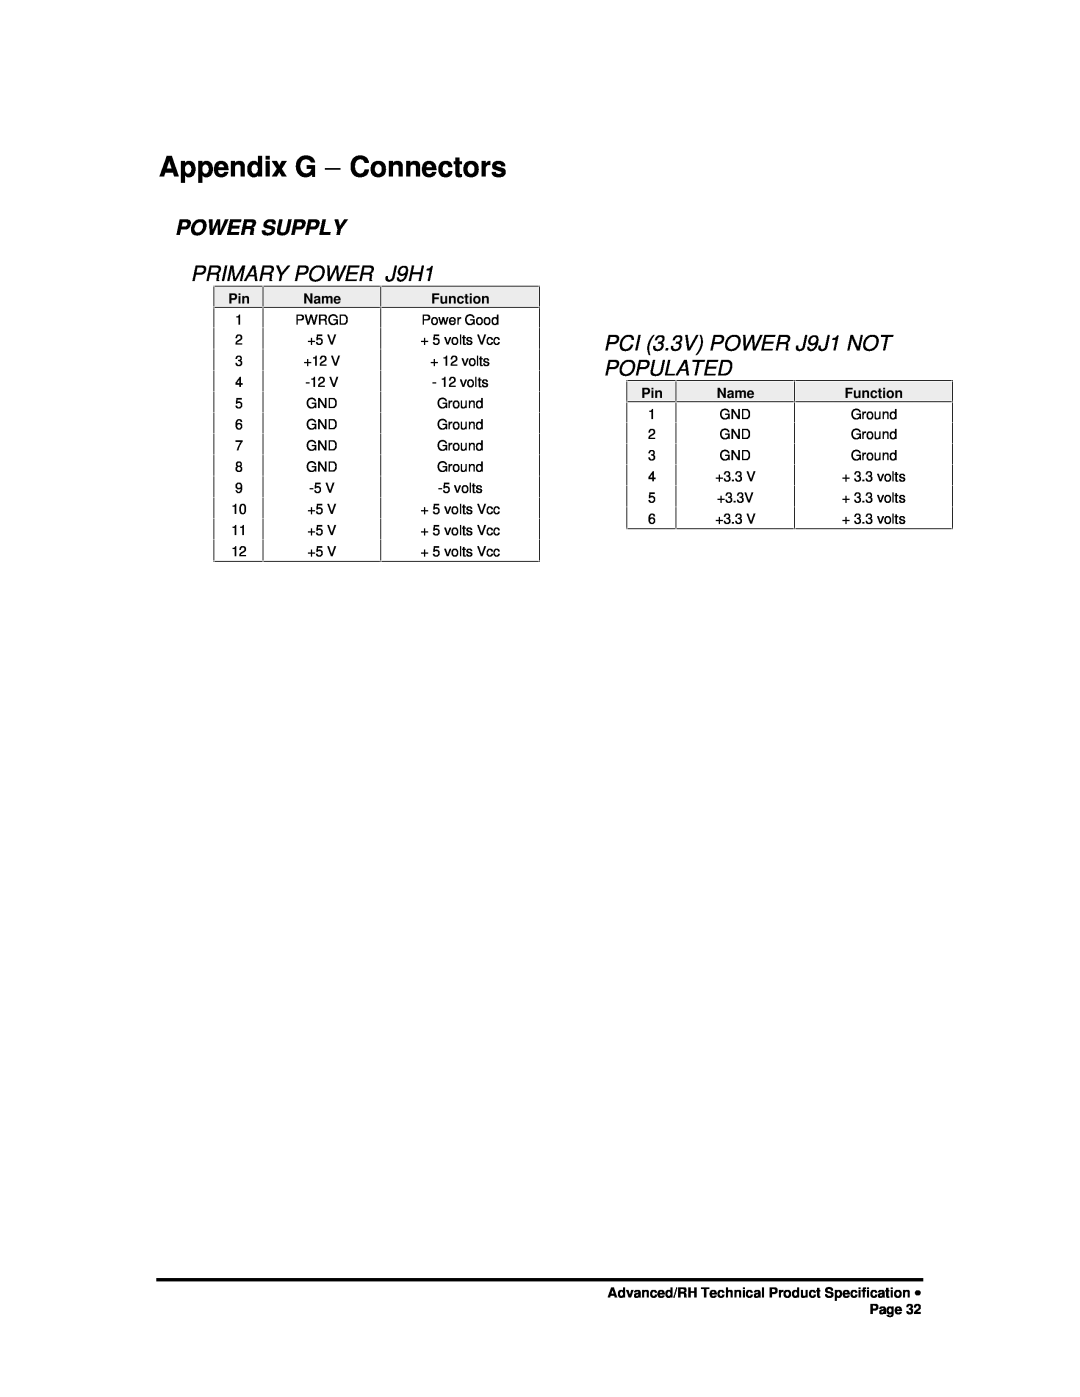 Intel 281809-003 manual Appendix G − Connectors, Power Supply, PRIMARY POWERJ9H1, PCI 3.3V POWER J9J1 NOT POPULATED 